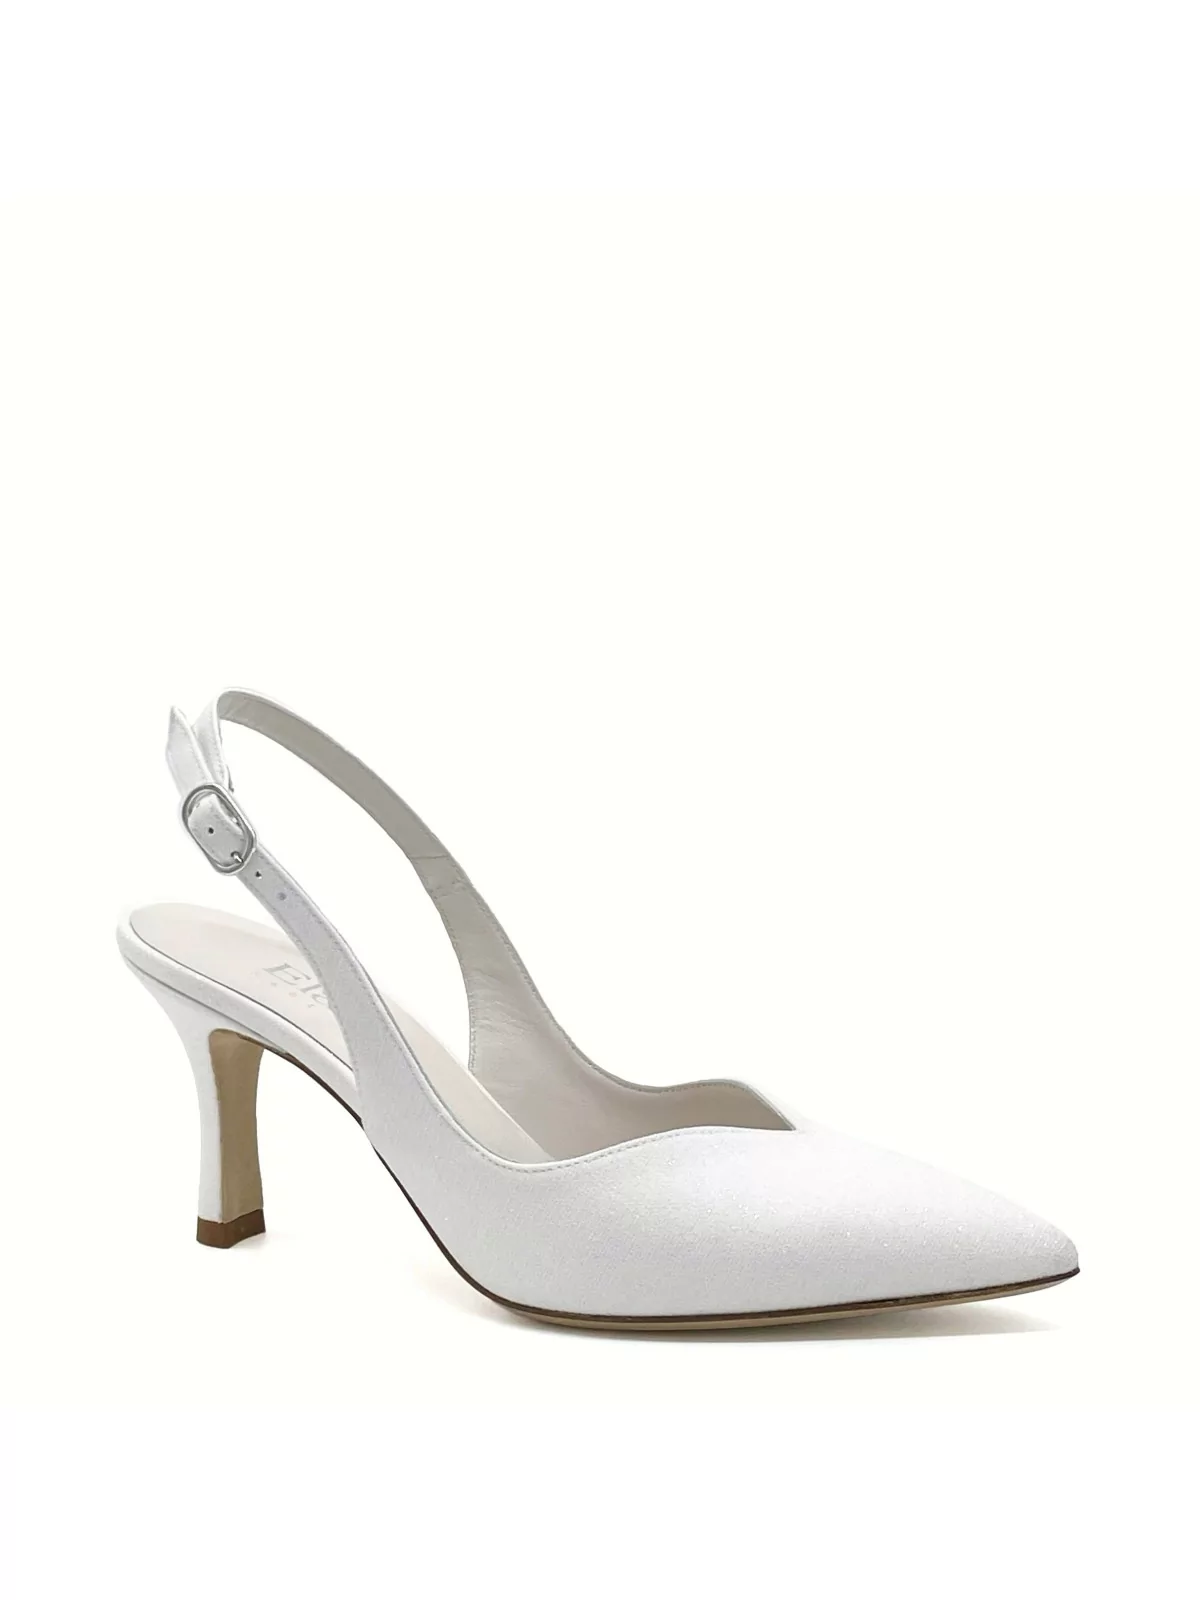 White laminate fabric slingback with a sweetheart collar. Leather lining. Leathe